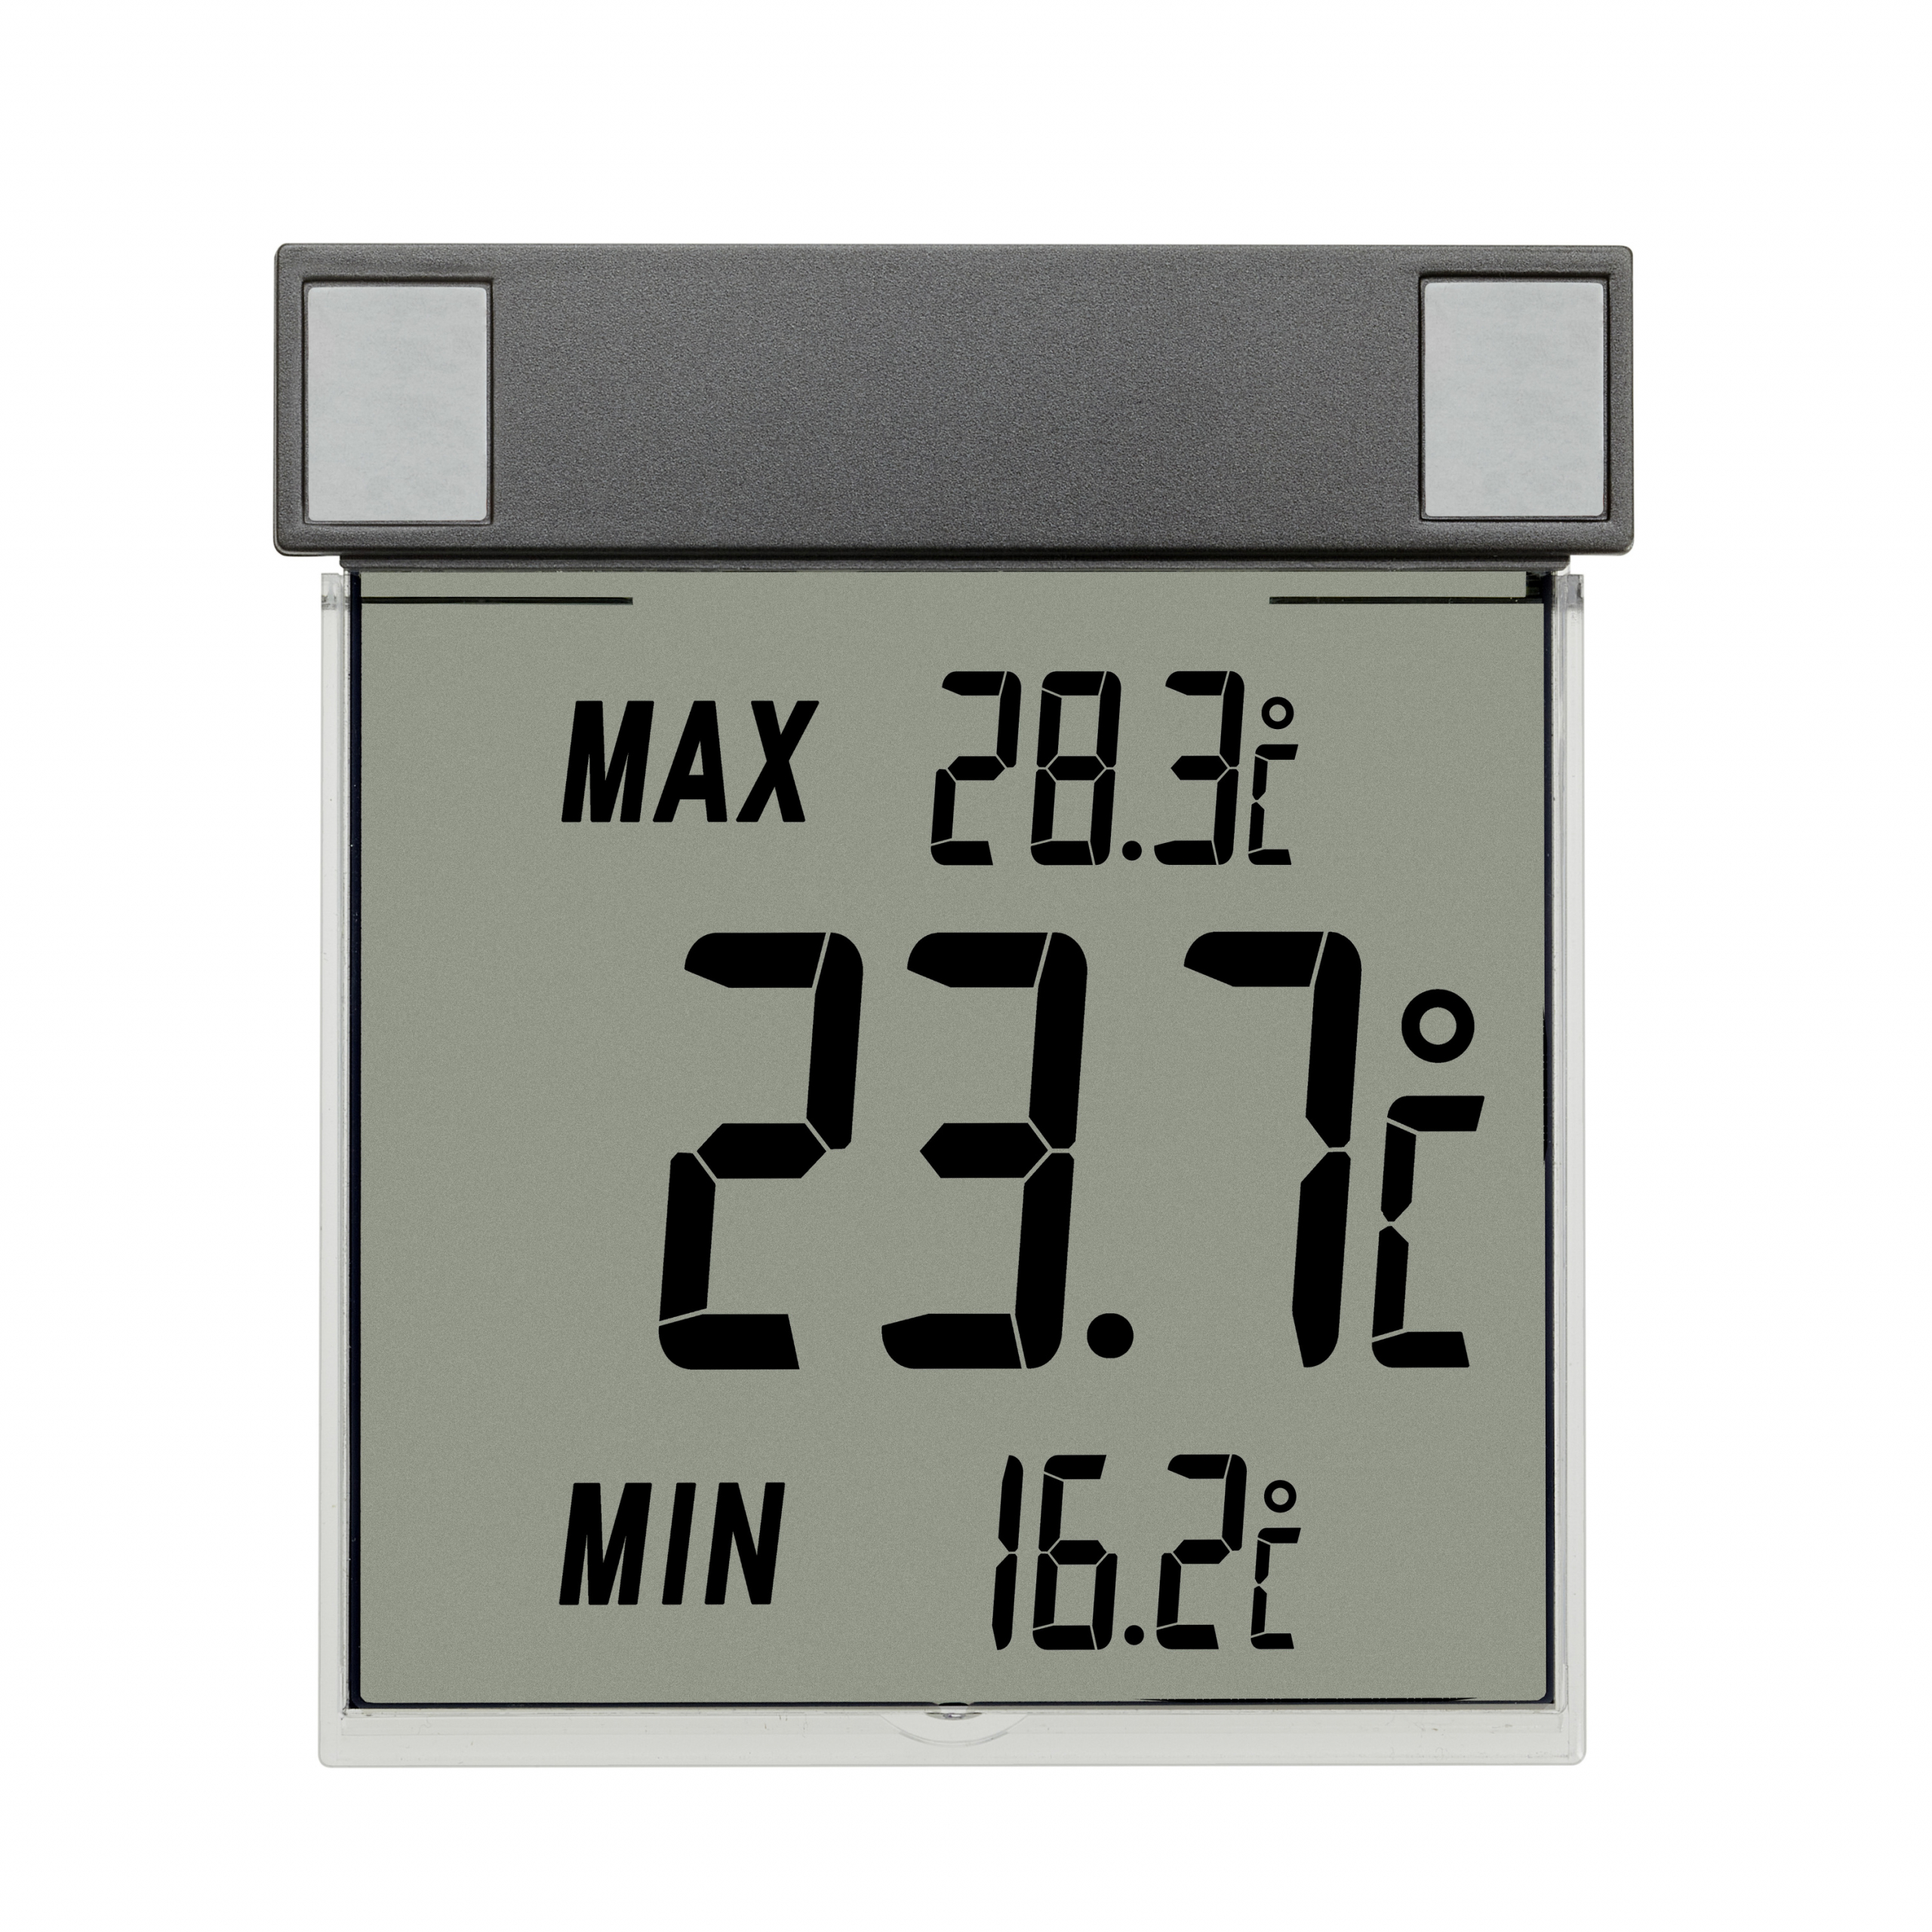 DIGITALES FENSTERTHERMOMETER VISION GROSSE LCD TFA 30.1025 MIN-MAX-THERMOMETER 